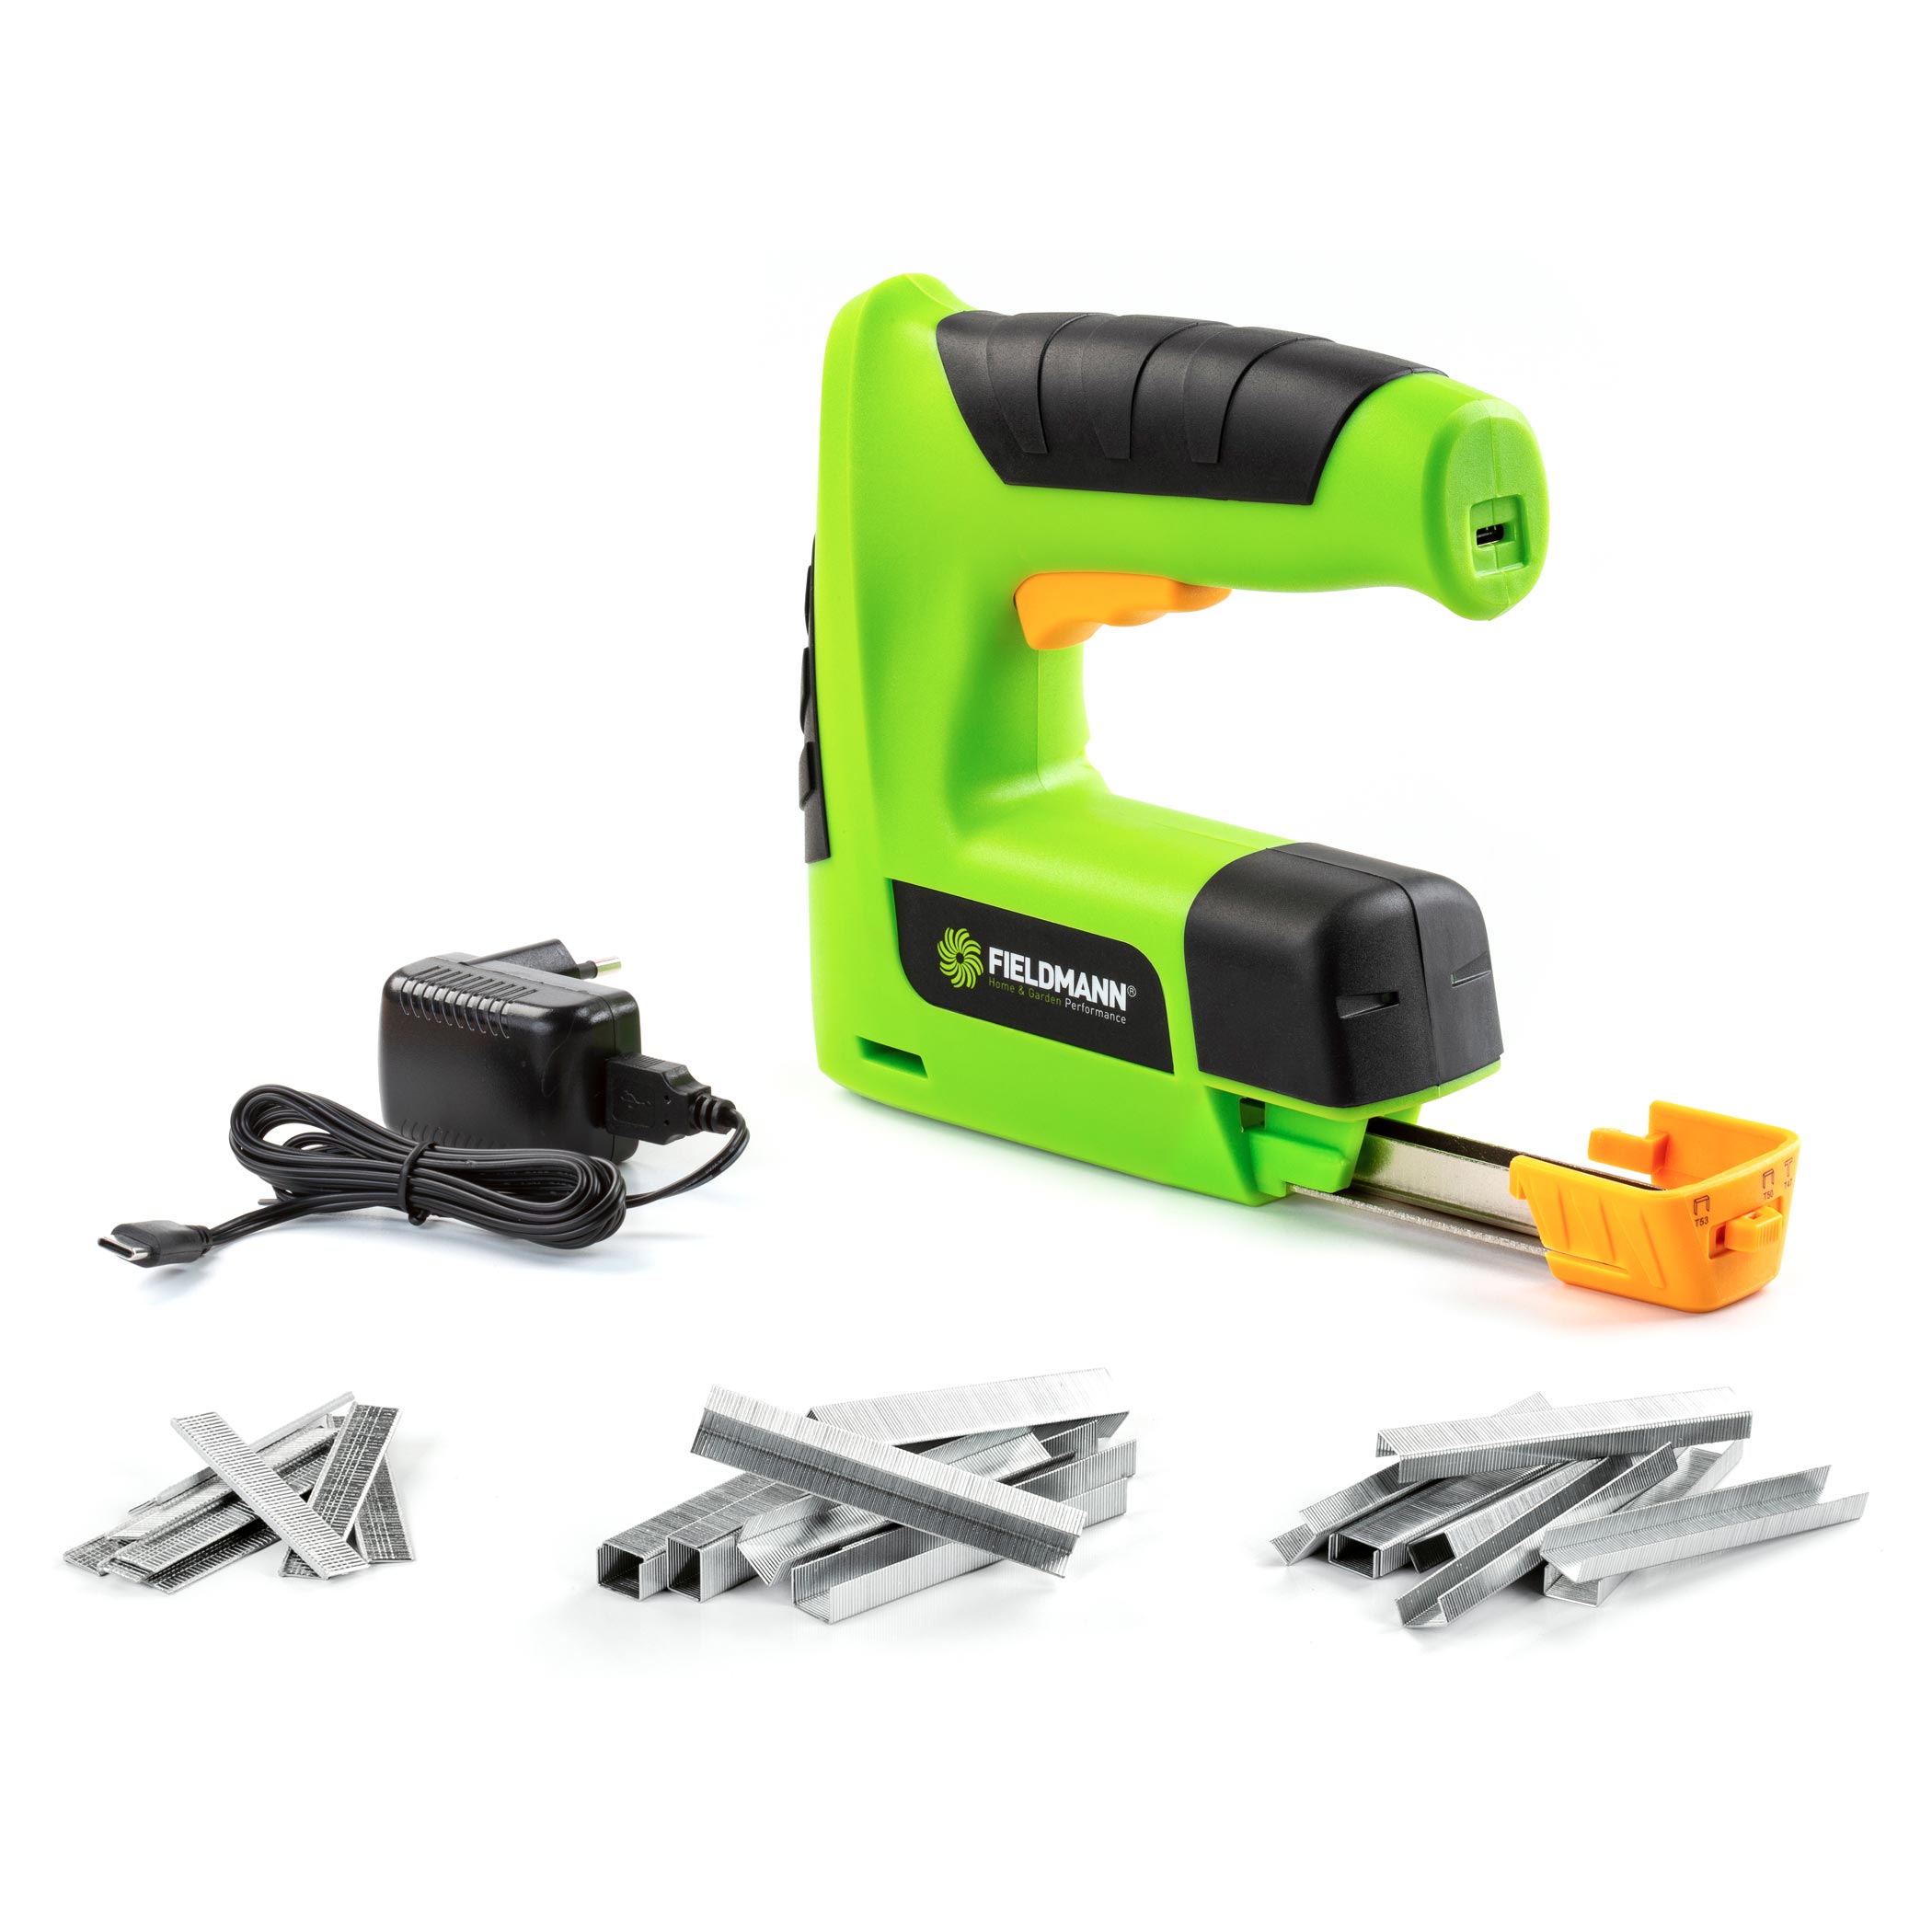 RYOBI ONE+ 18V 18-Gauge Cordless AirStrike Brad Nailer with Cordless  Compression Drive 3/8 in. Crown Stapler (Tools Only) P321-P317 - The Home  Depot